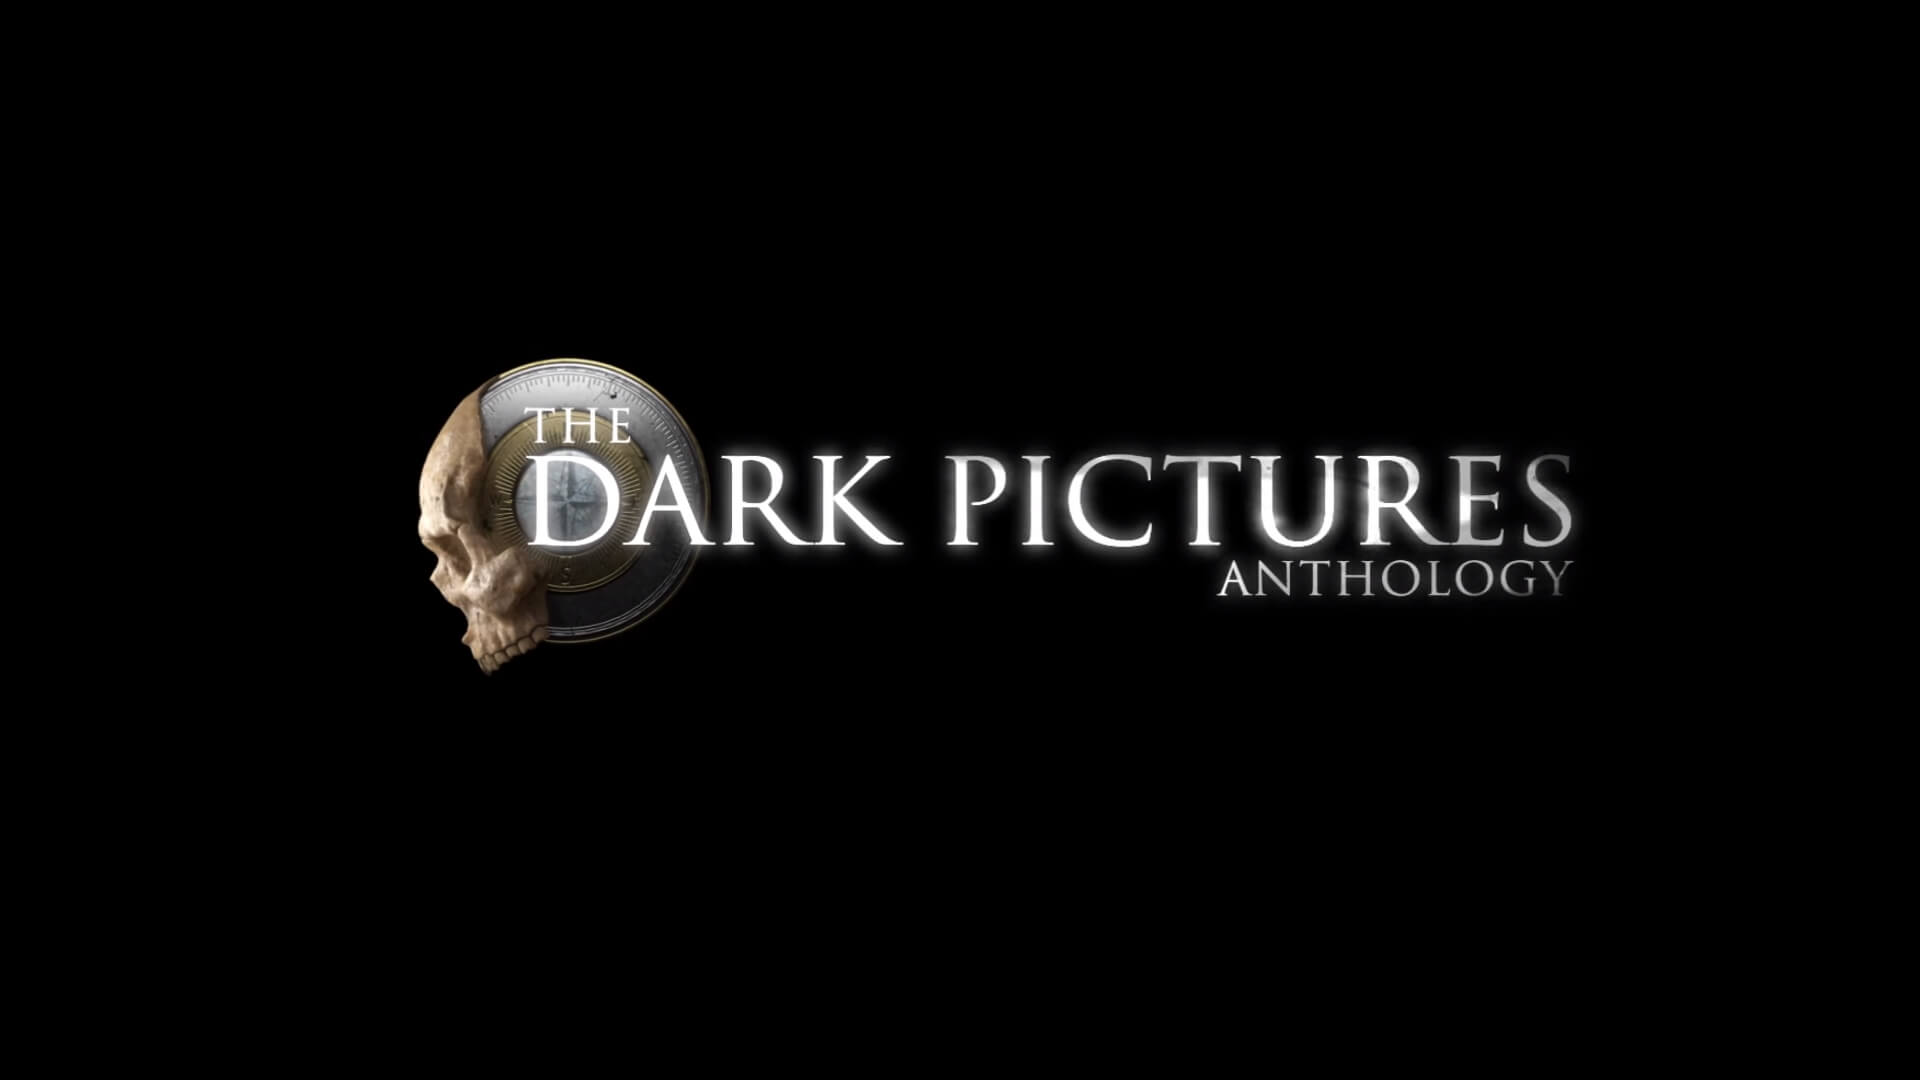 the dark picture anthology download free